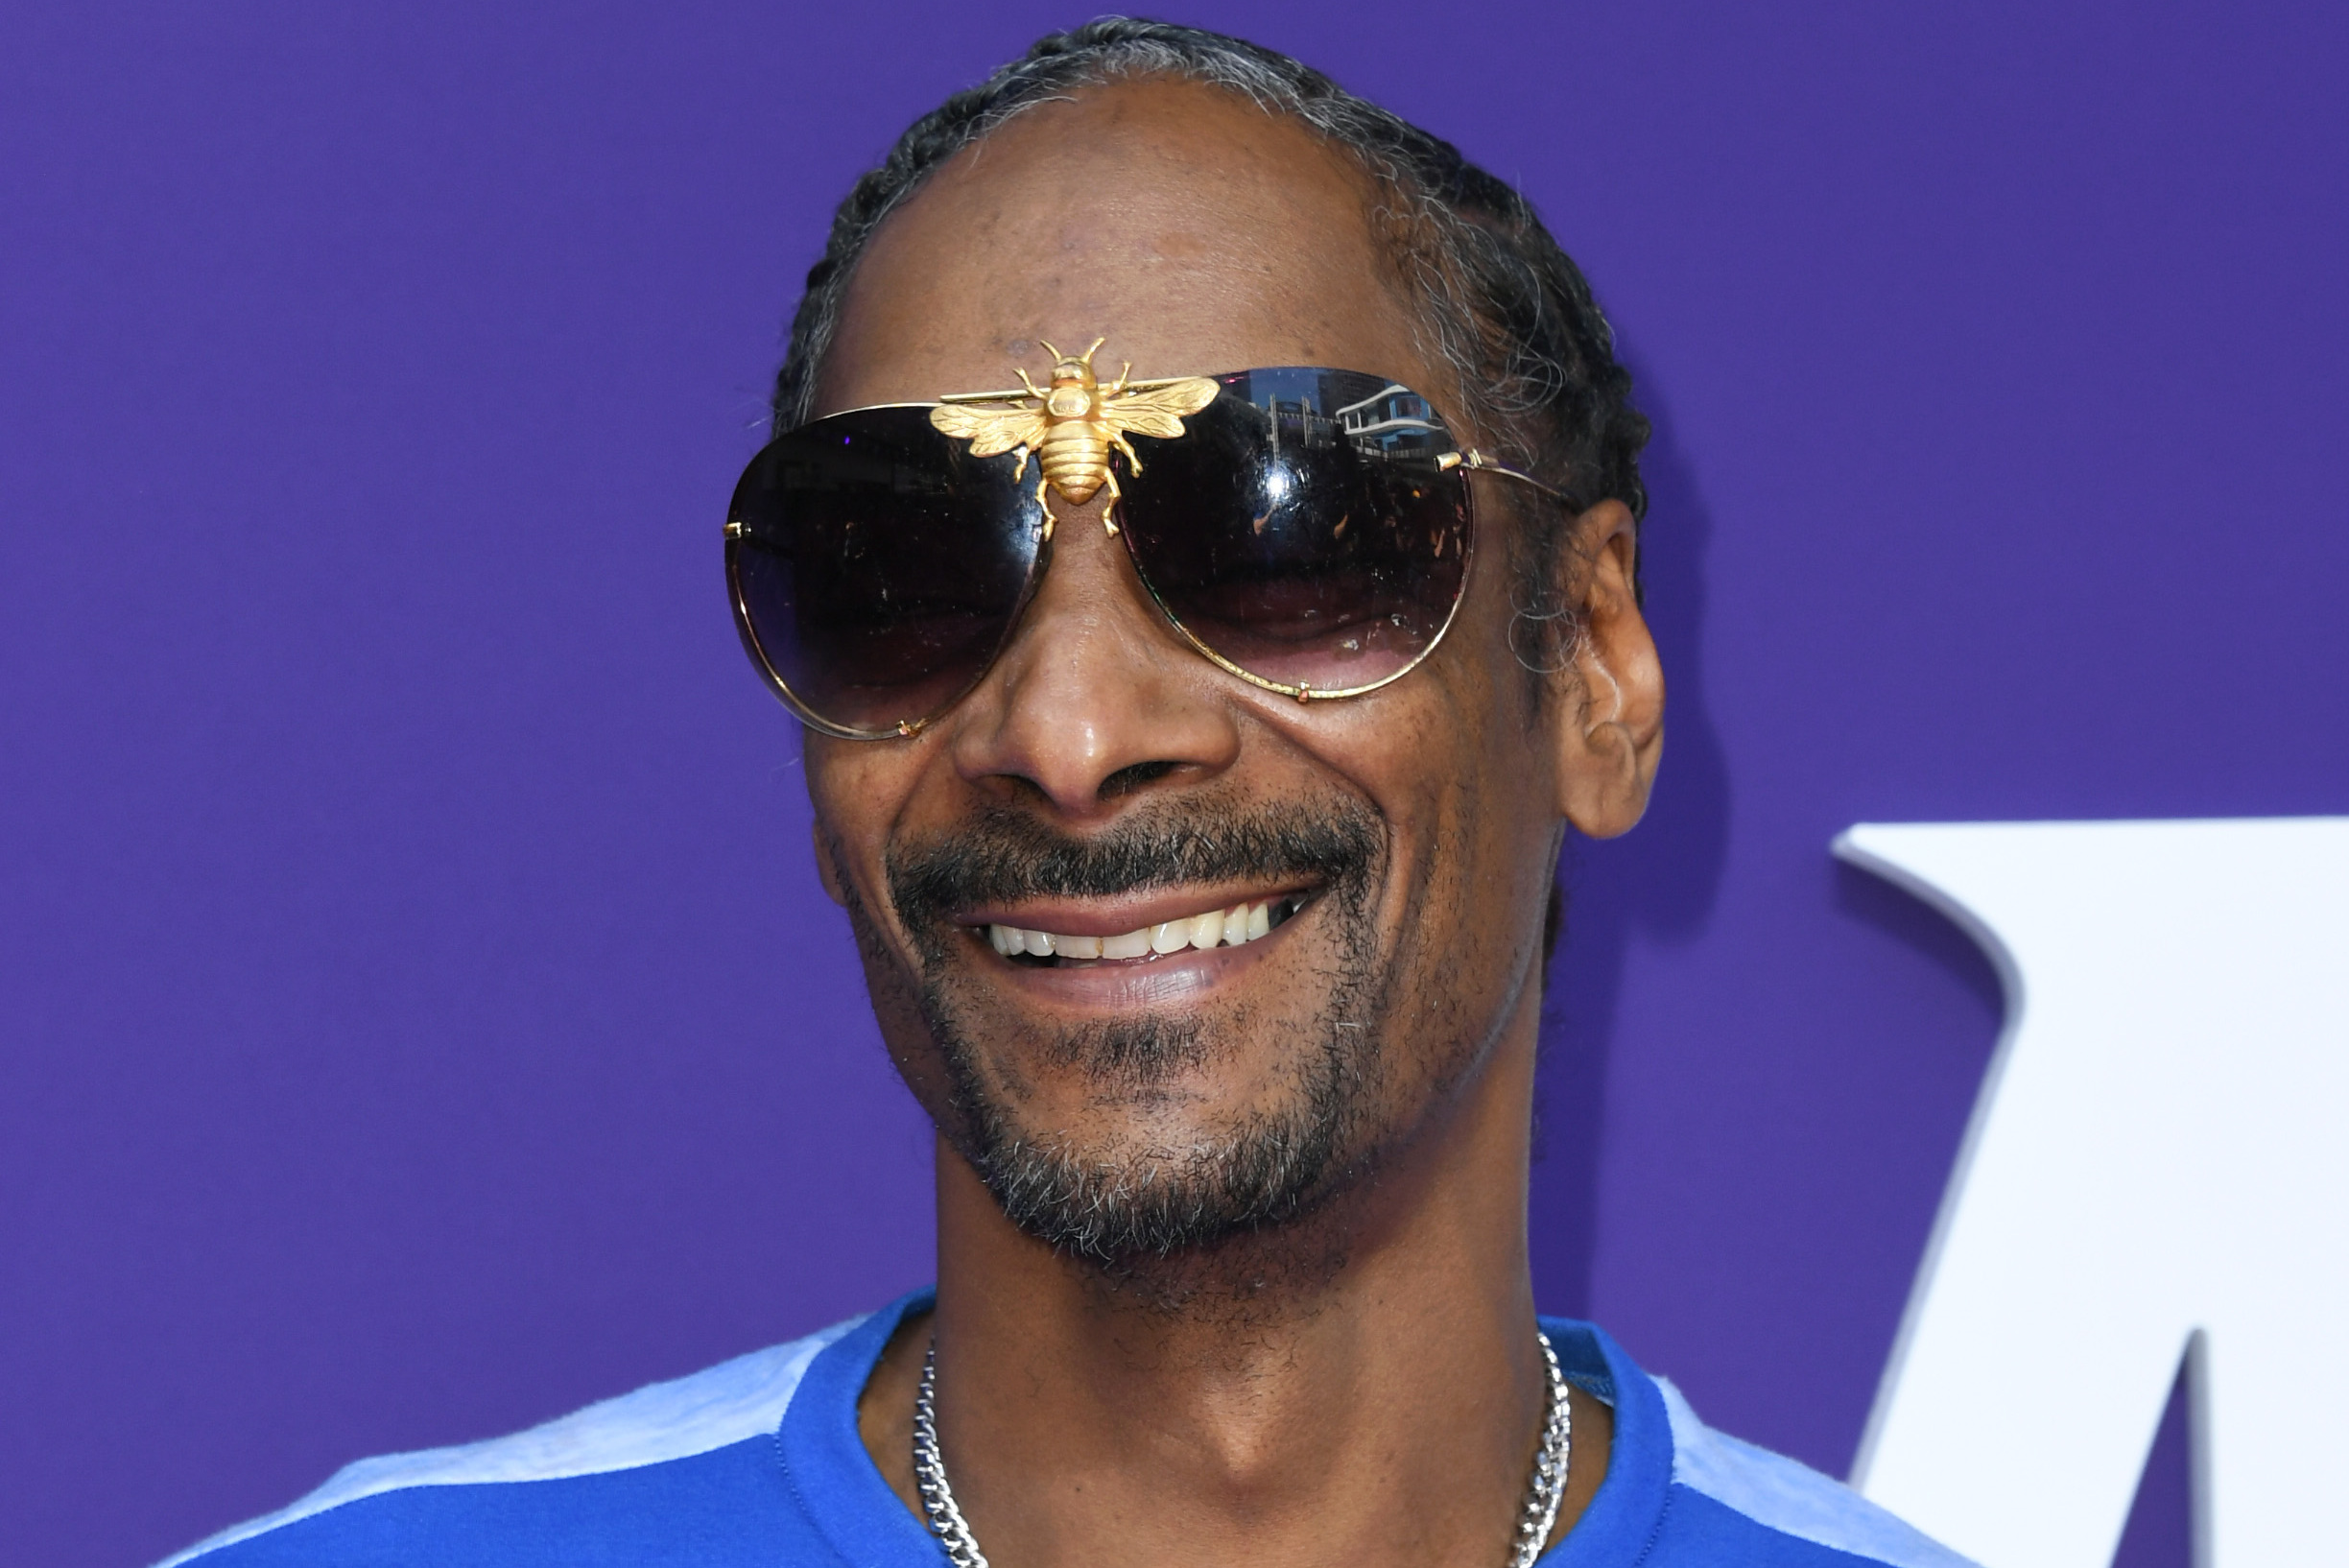 Snoop Dogg on Kansas Performance: 'They Invited Me to Come Do What I Do'